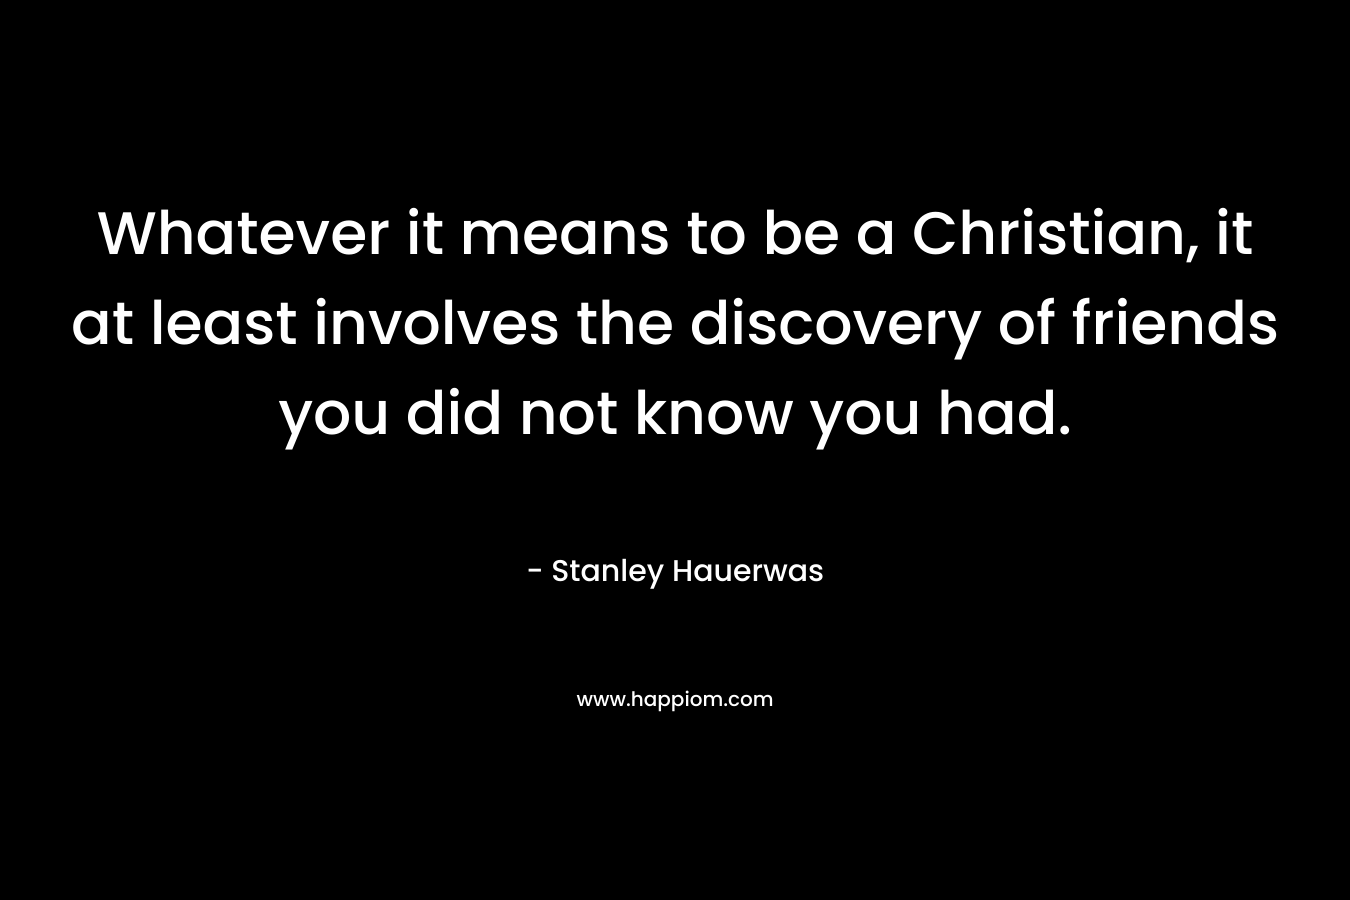 Whatever it means to be a Christian, it at least involves the discovery of friends you did not know you had. – Stanley Hauerwas